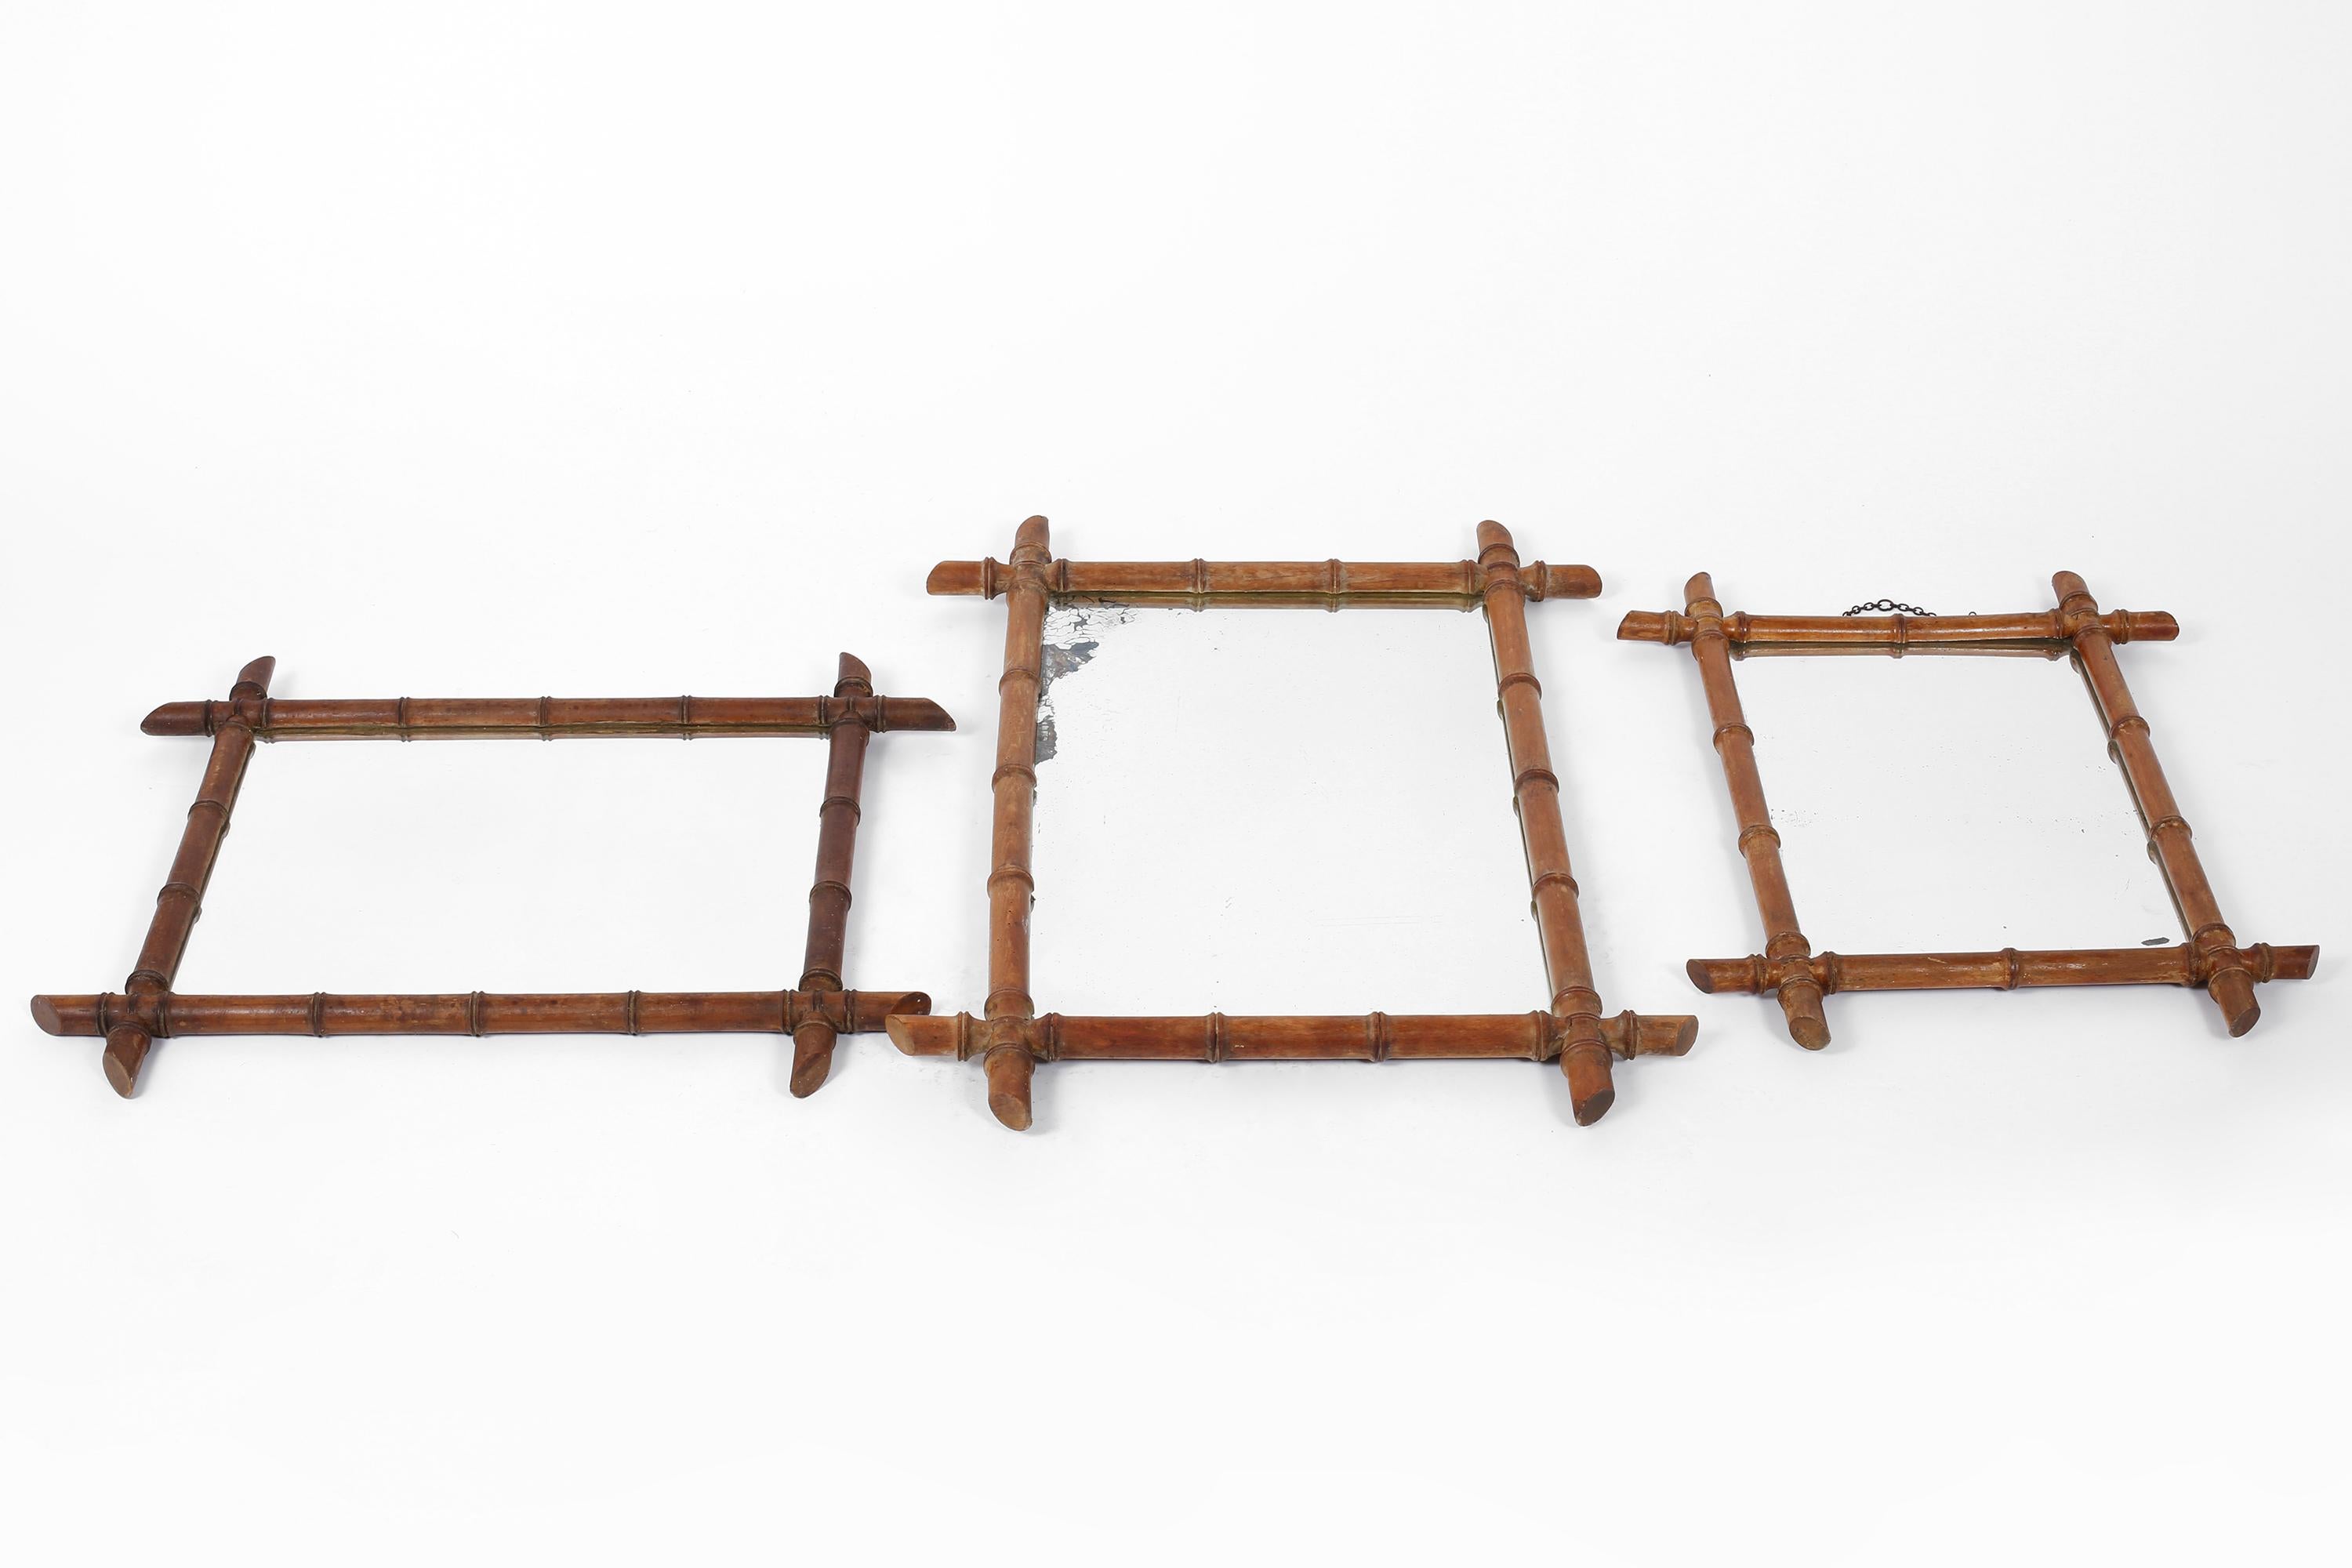 A trio of early 20th century carved wood mirrors with stylised faux bamboo frames and nice foxing to two of the plates. French, c. 1900.

Left: W65 x H53.5 cm

Centre: W57 x H78 cm

Right: W47 x H61.5 cm.